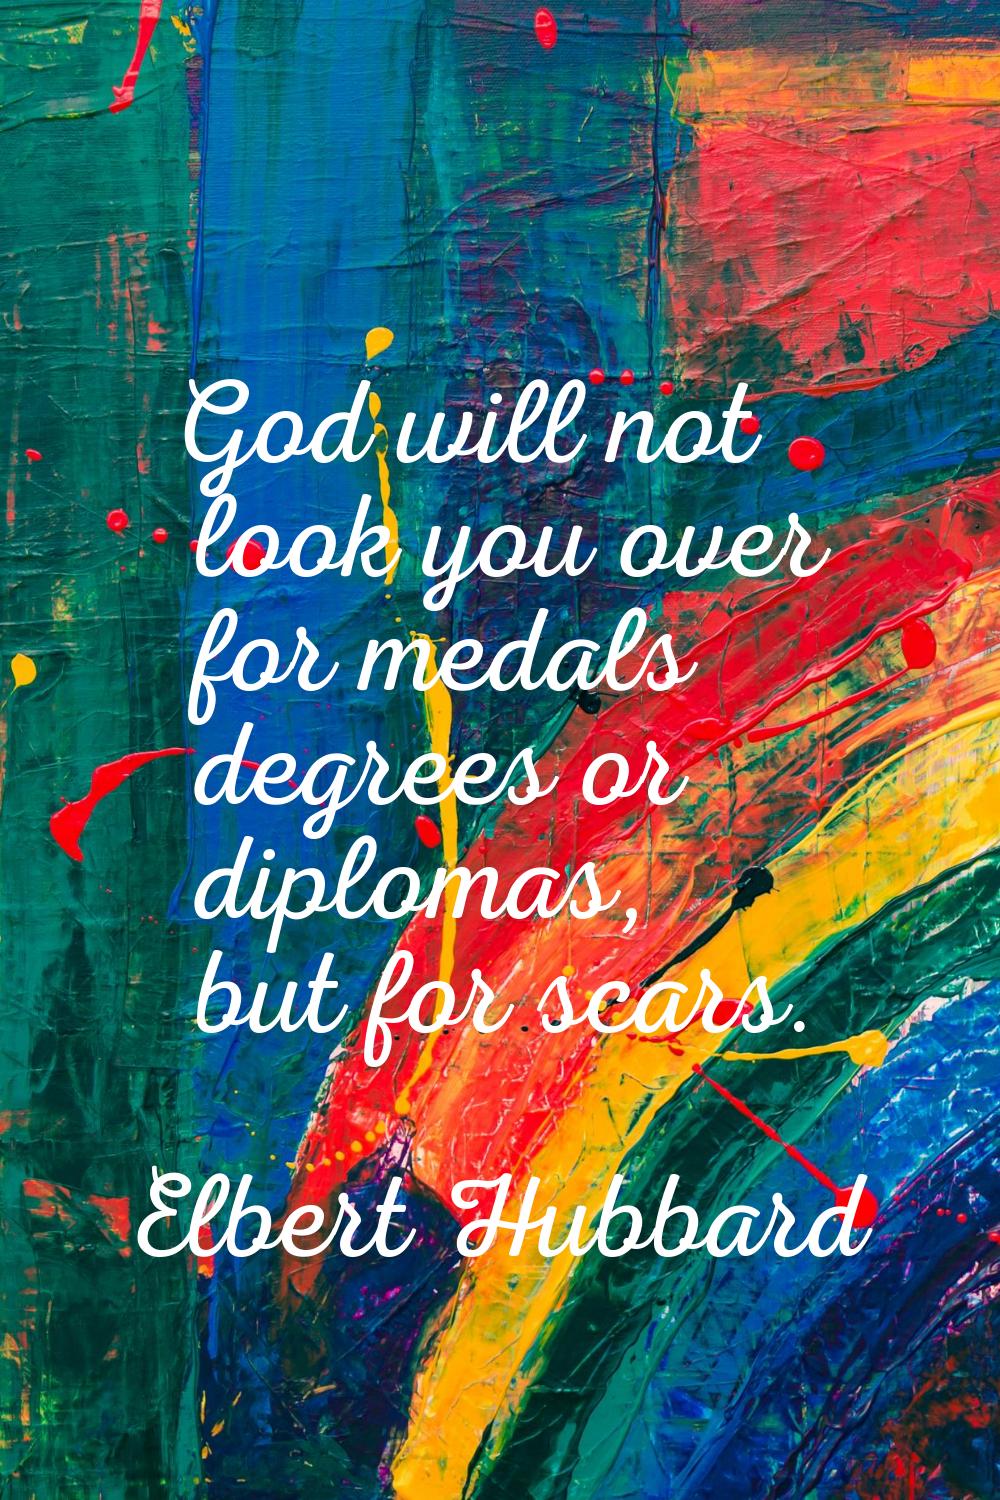 God will not look you over for medals degrees or diplomas, but for scars.